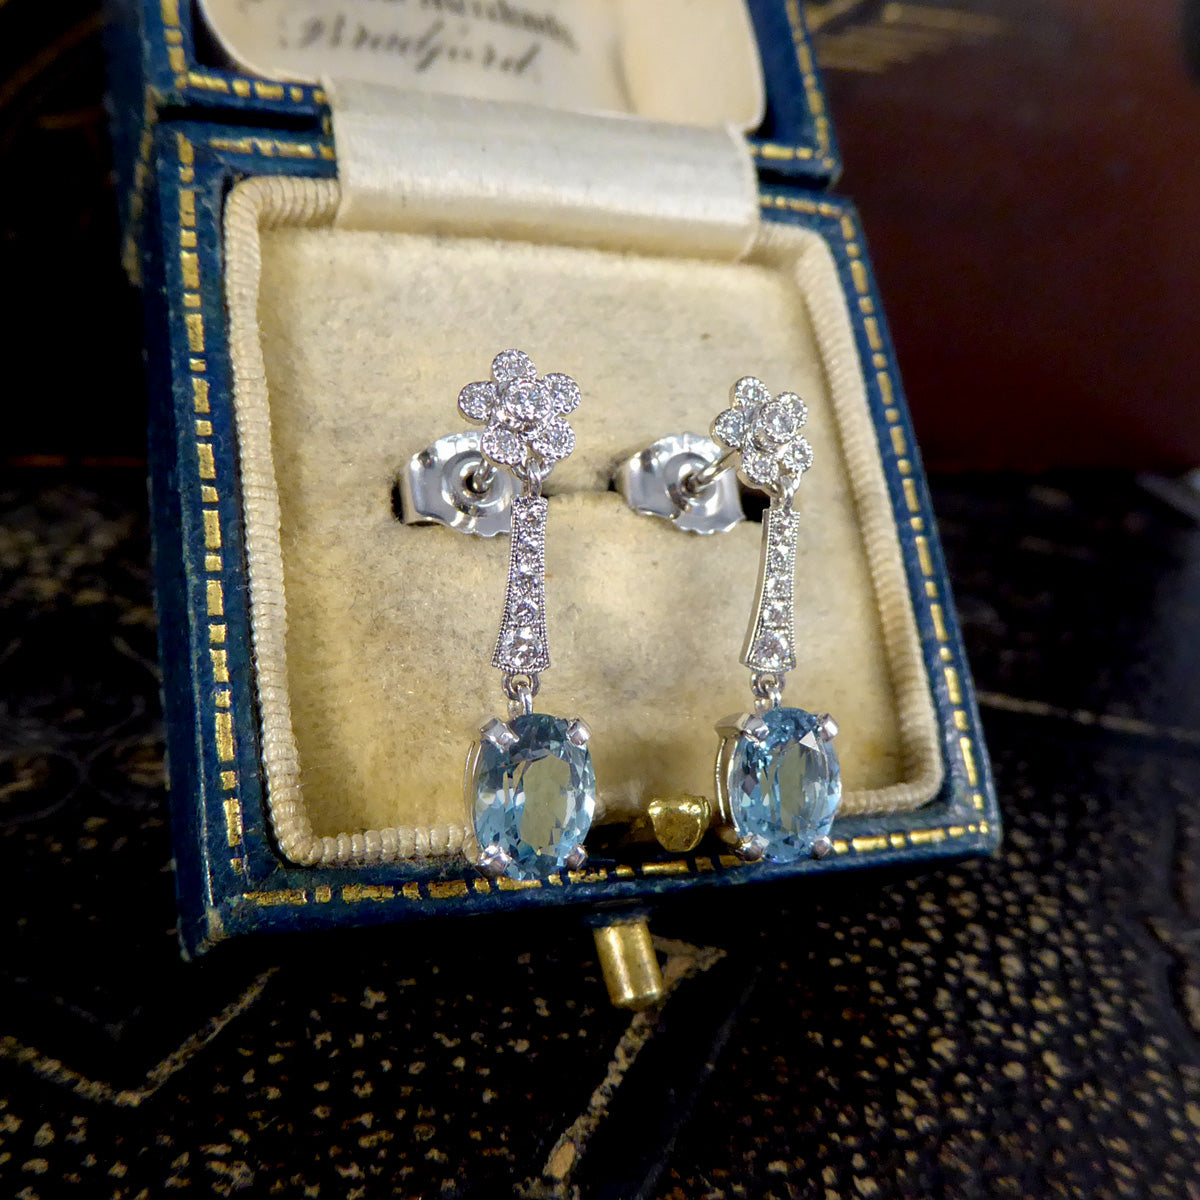 Aquamarine and Diamond Belle Epoque Inspired Drop Earrings in 18ct White Gold